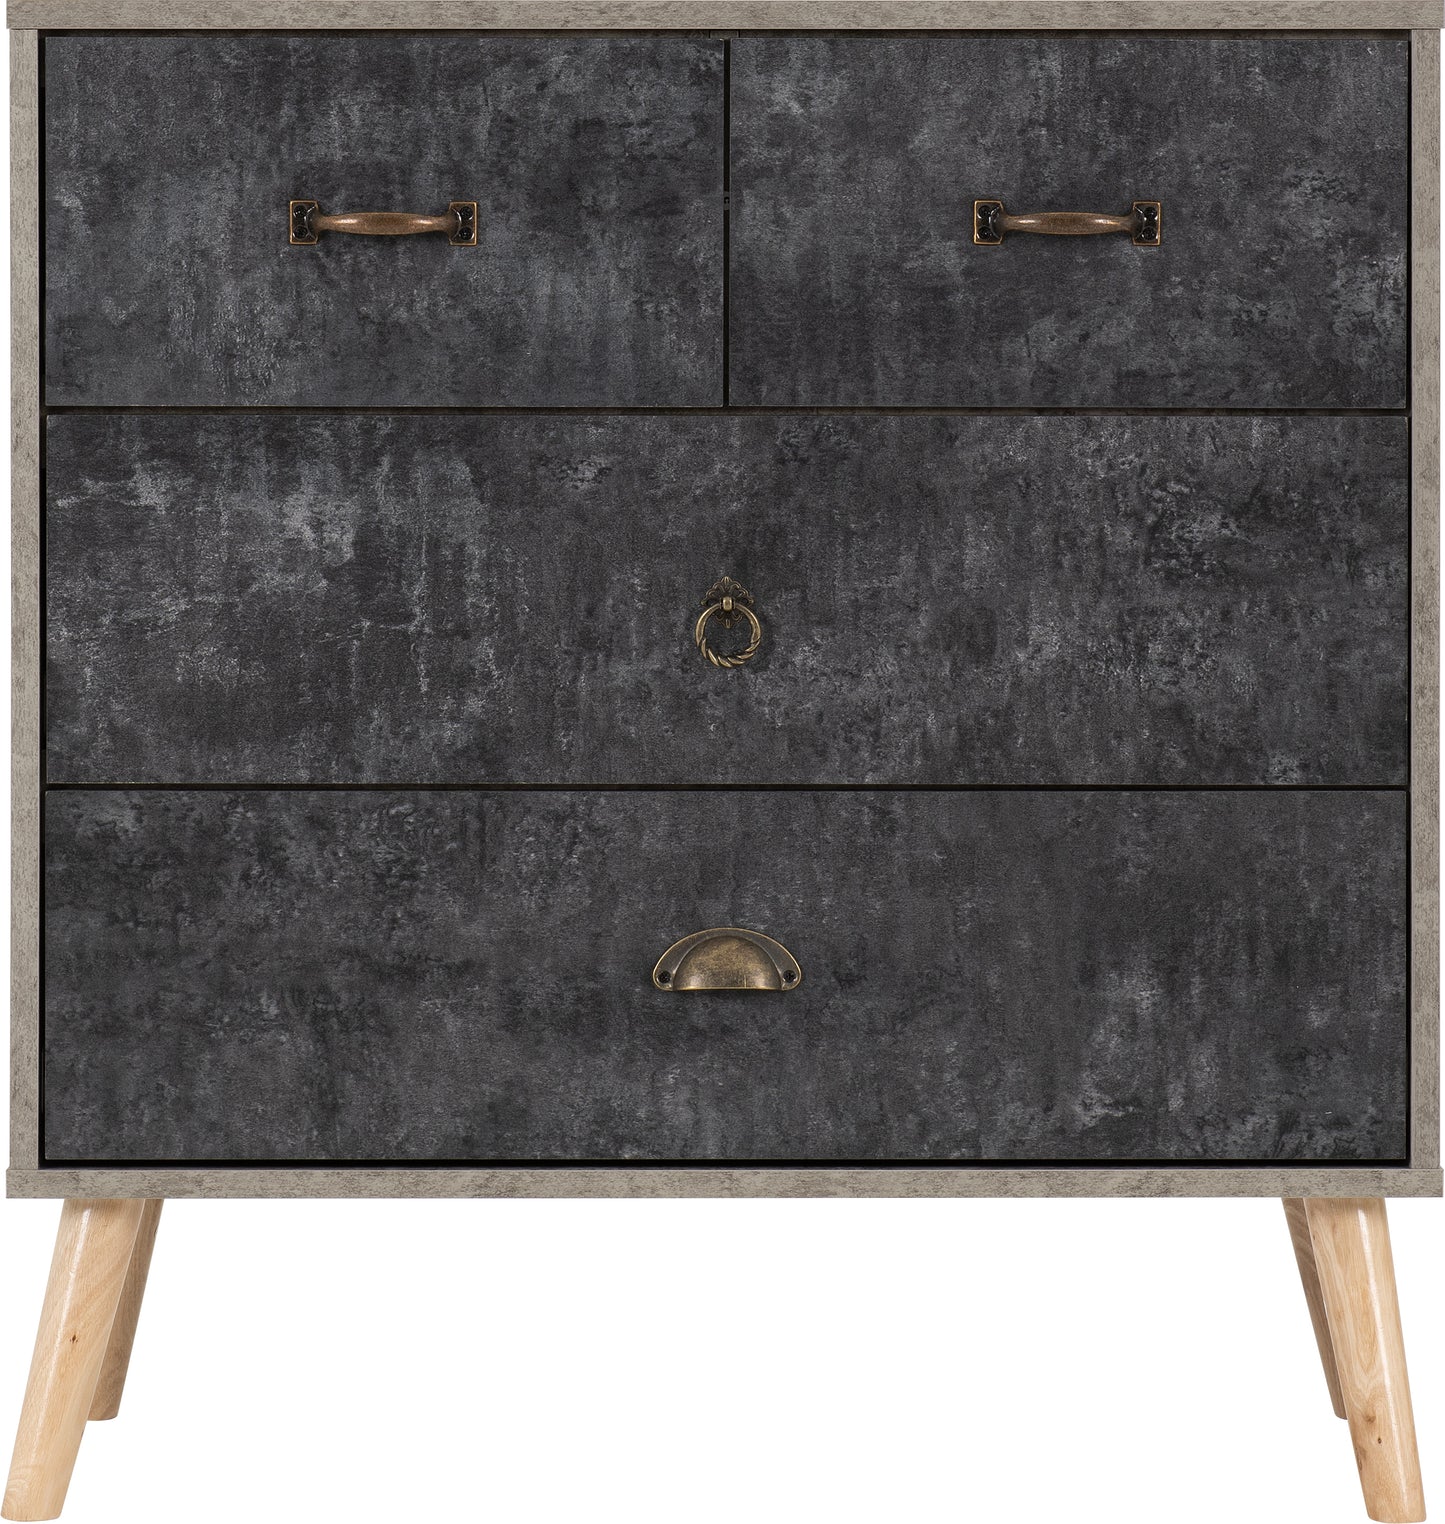 NORDIC 2+2 DRAWER CHEST - CONCRETE EFFECT/CHARCOAL